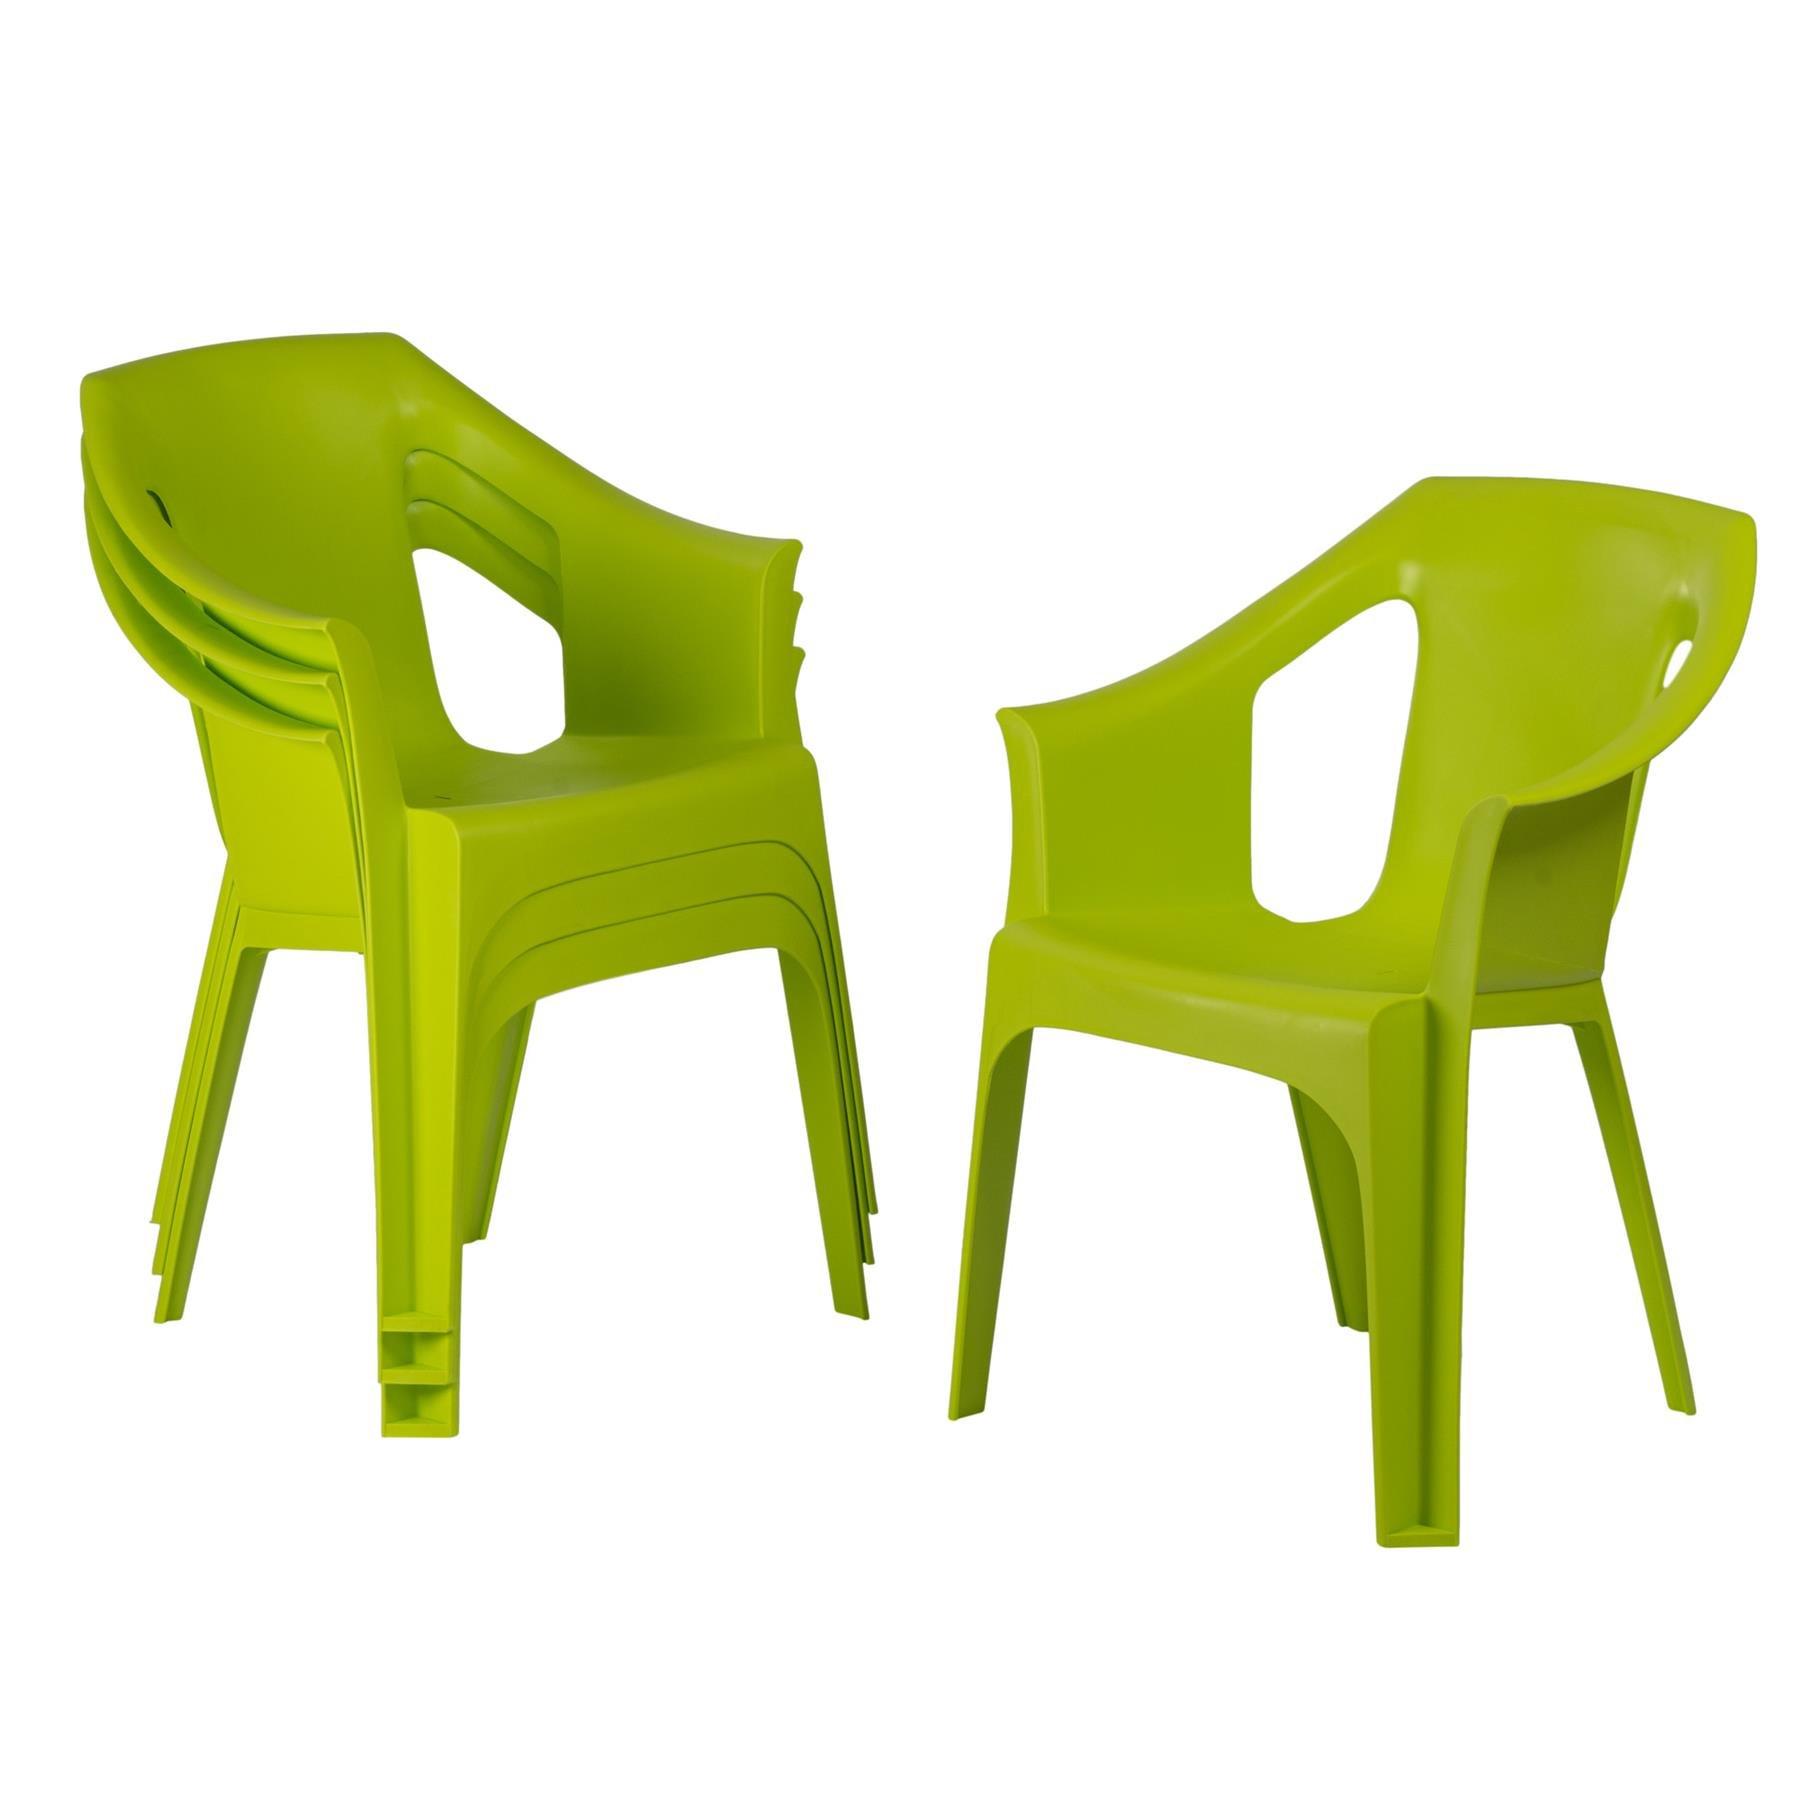 Cool Garden Dining Chair - Pack of 8 - Green